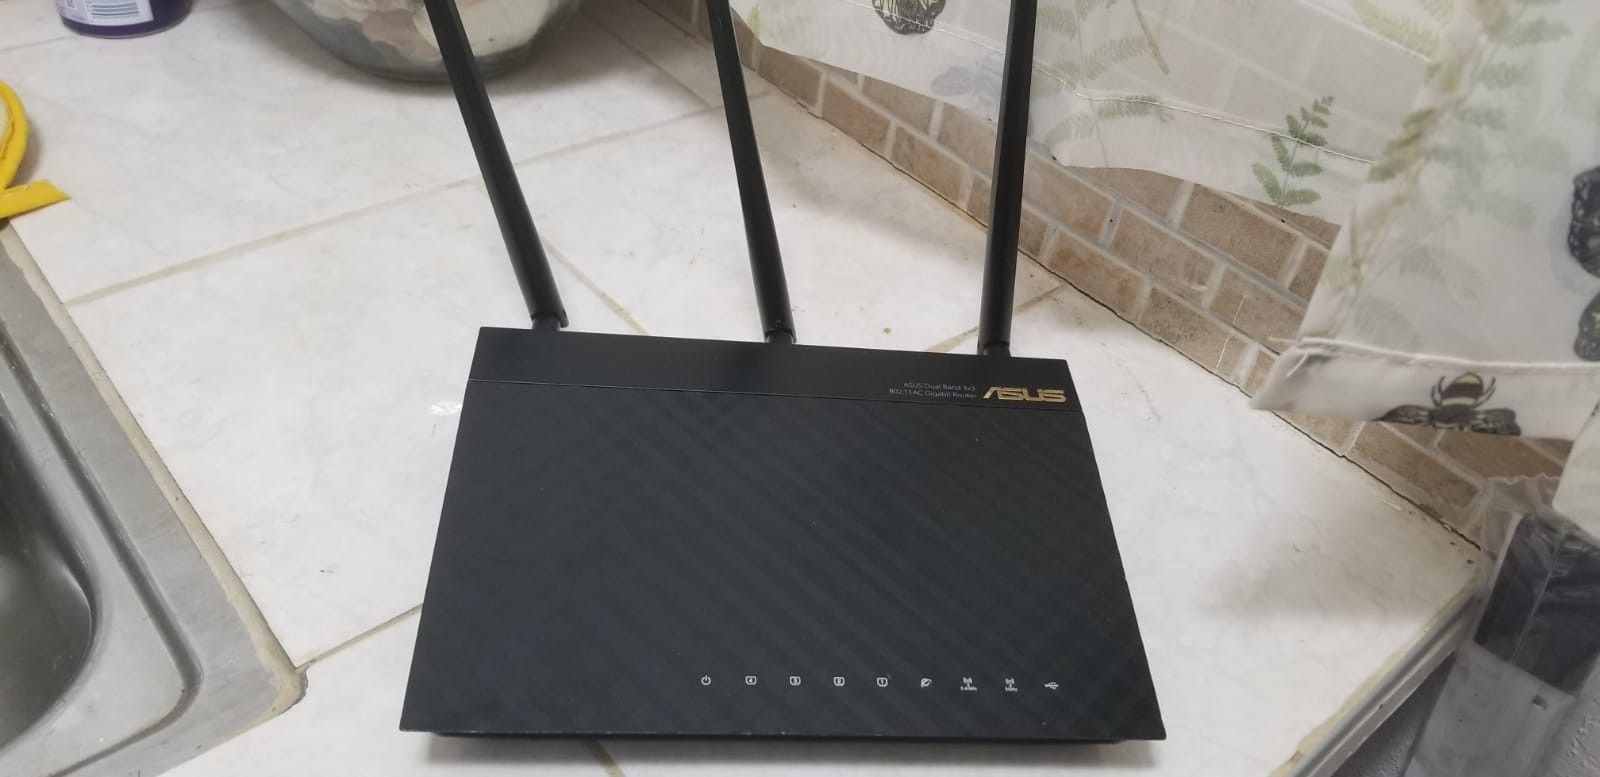 Asus Dual Band 3x3 Router